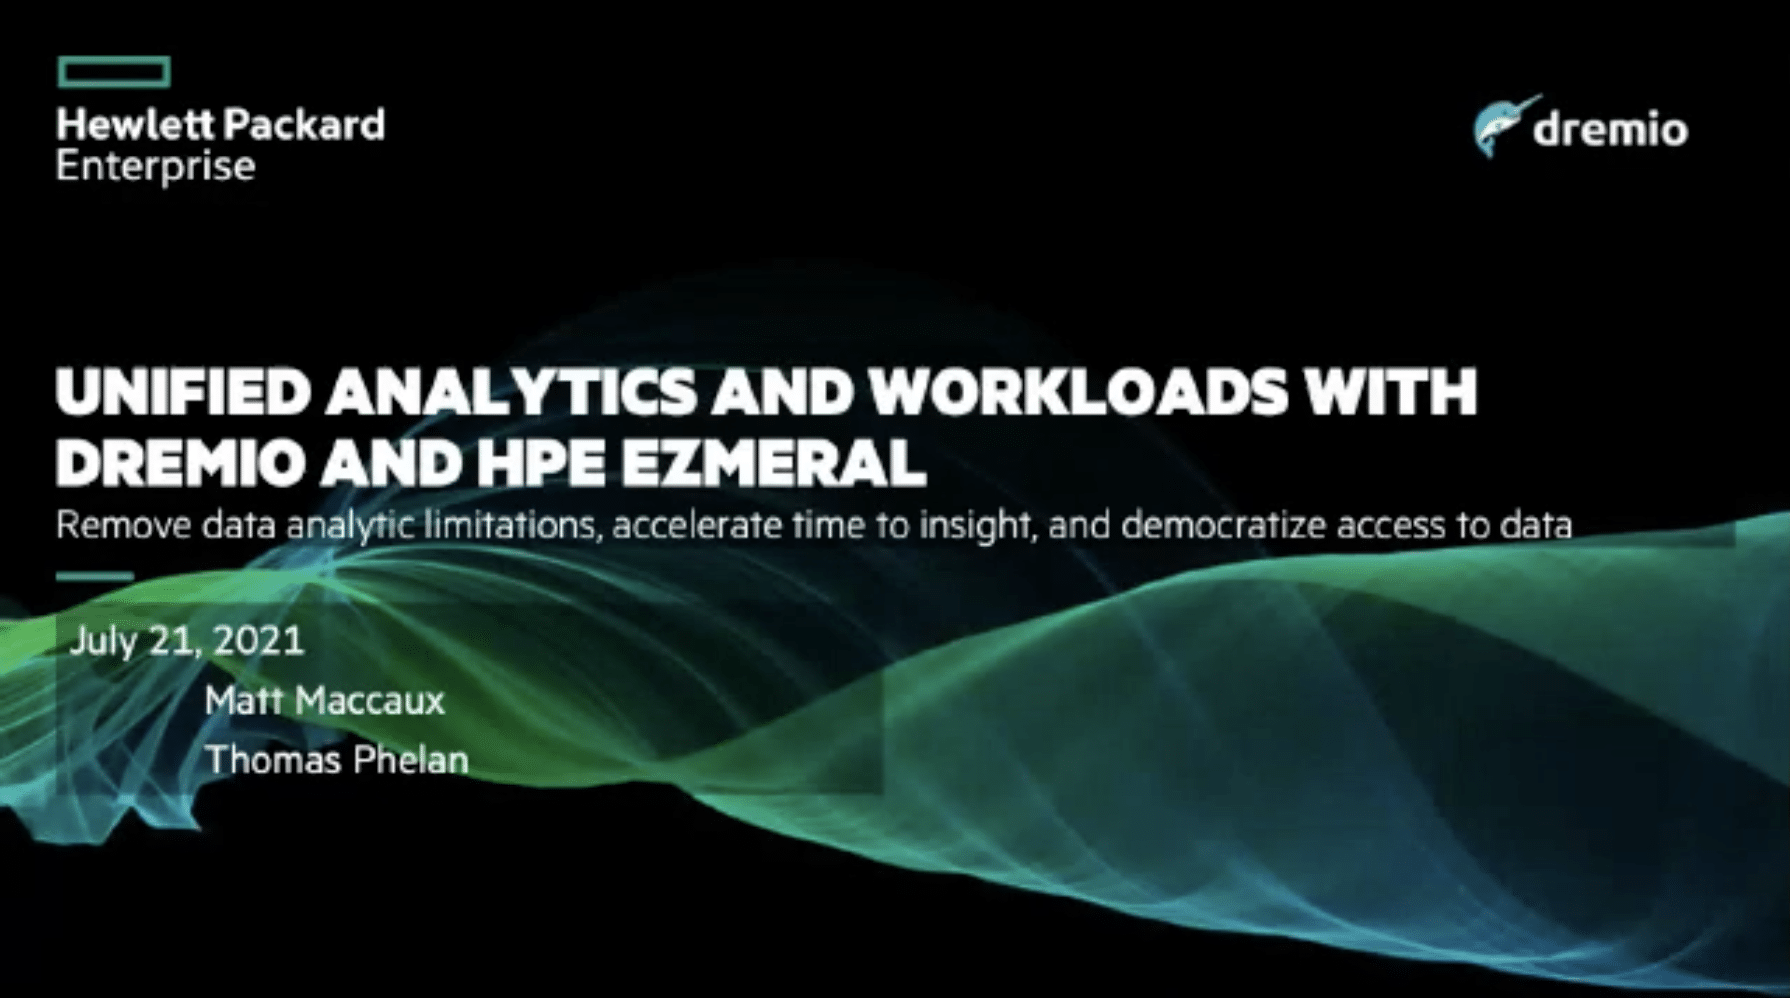 Unified Analytics and Workloads with Dremio and HPE Ezmeral